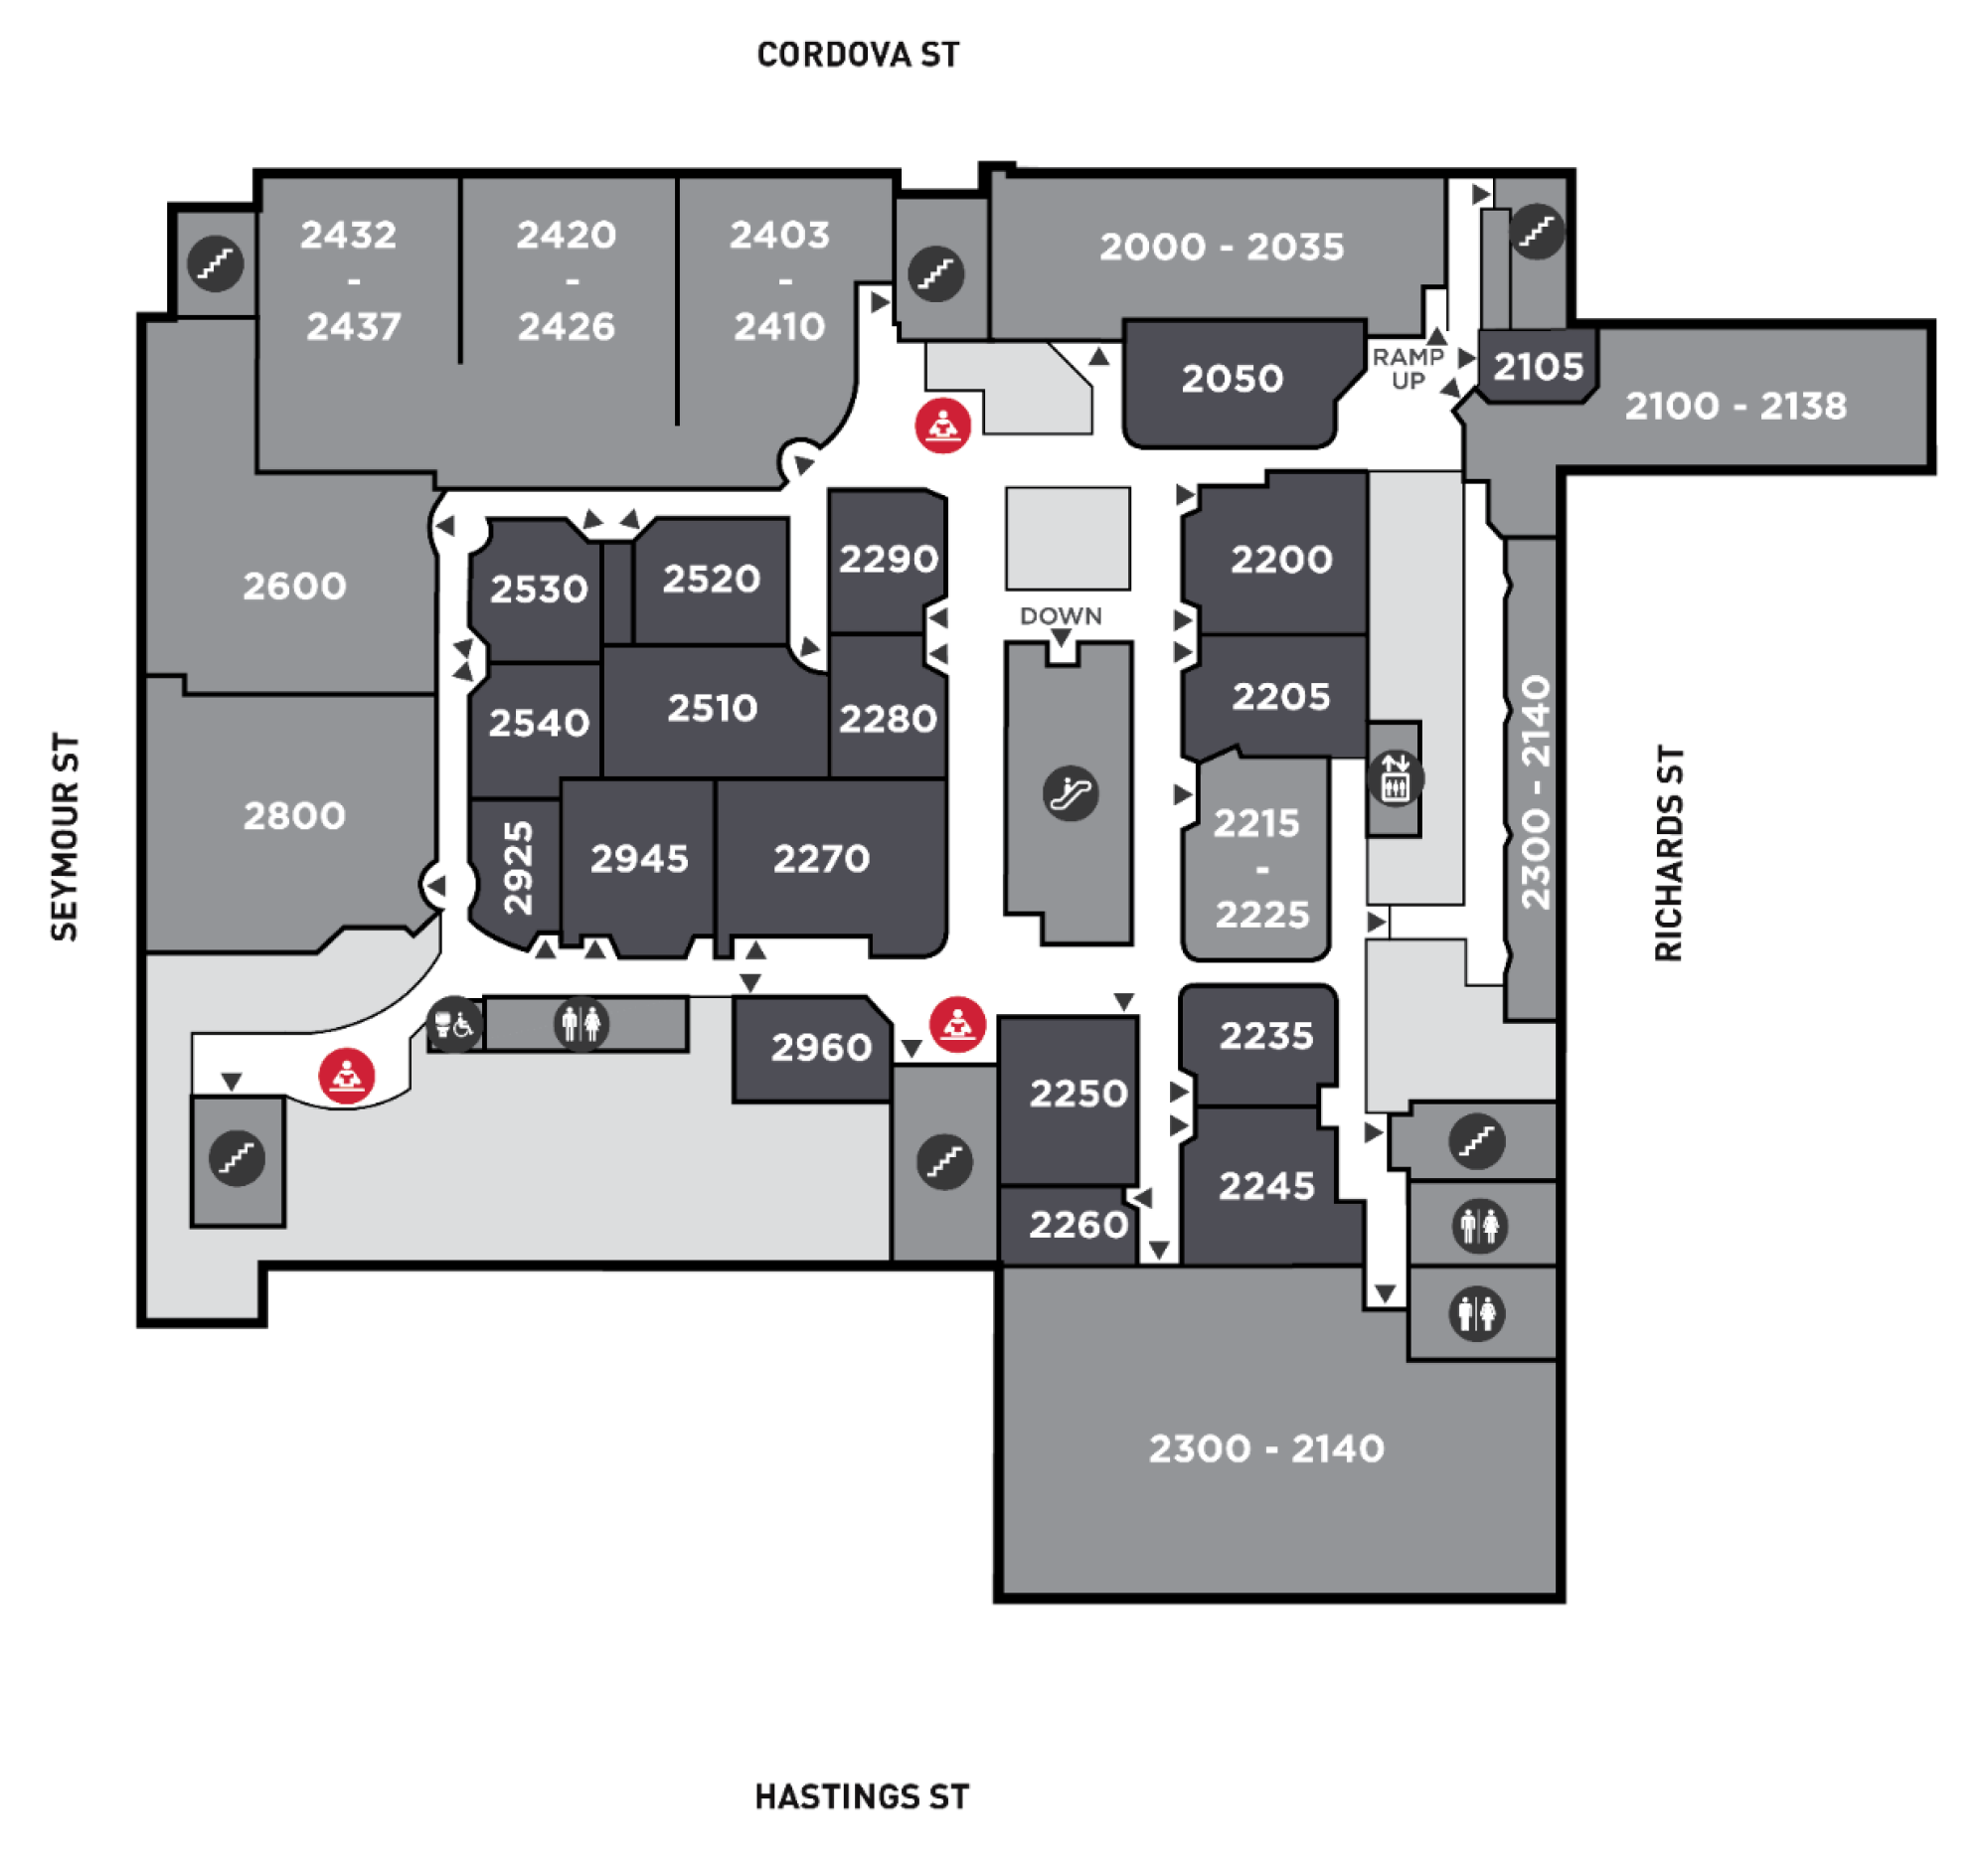 Second level floor plan highlighting study spaces